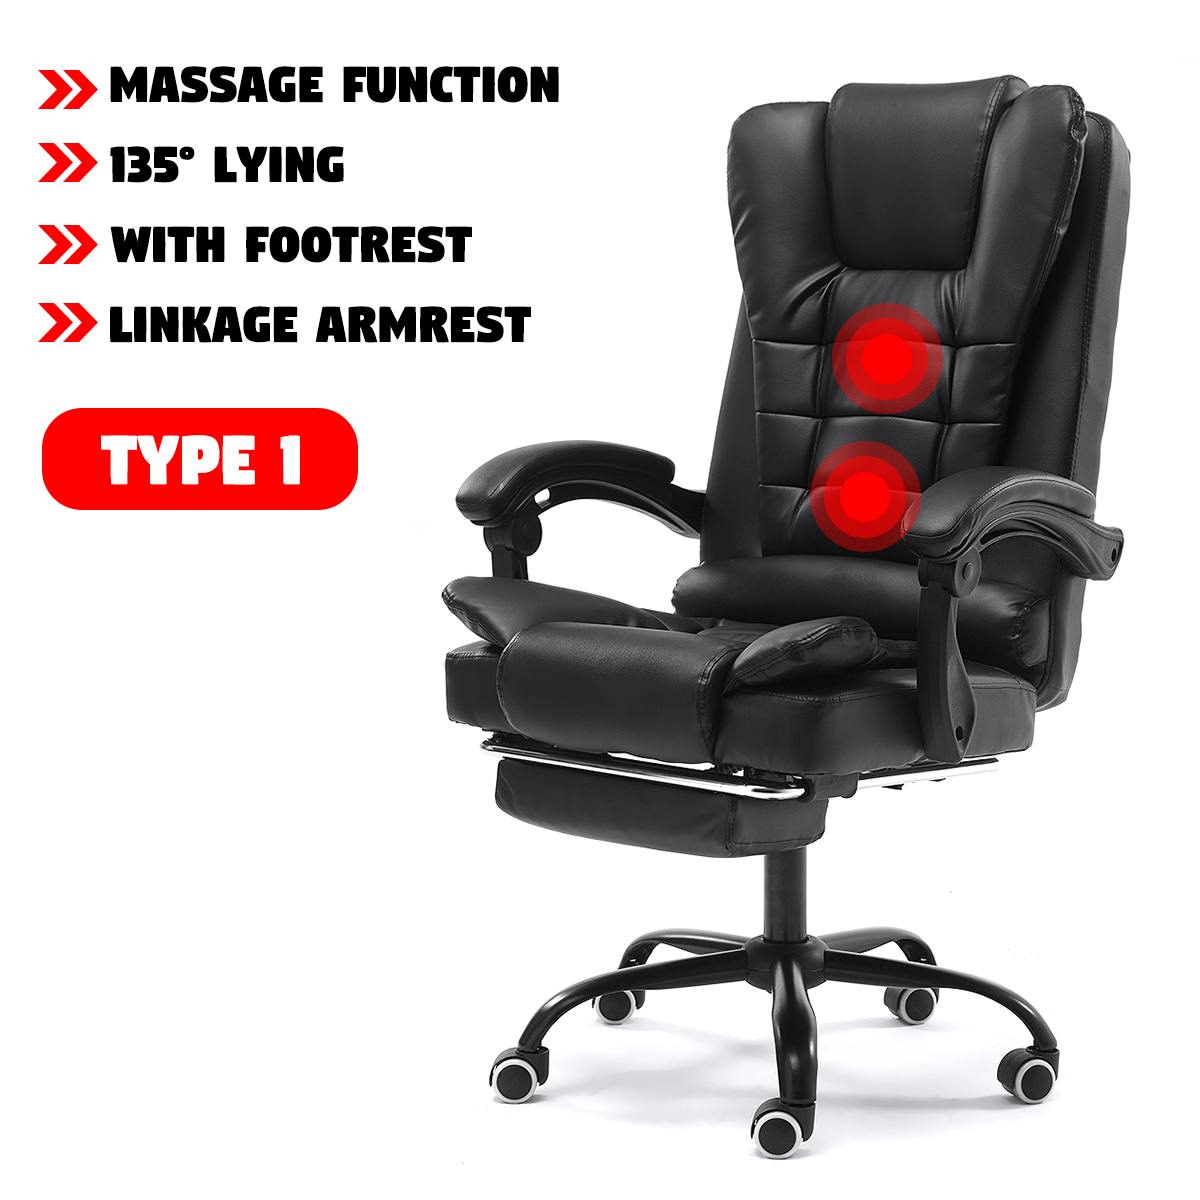 Computer Office Chair Gaming Home Leather Executive Swivel Massage Gamer Chair Lifting Rotatable Armchair Adjustable Desk Chair